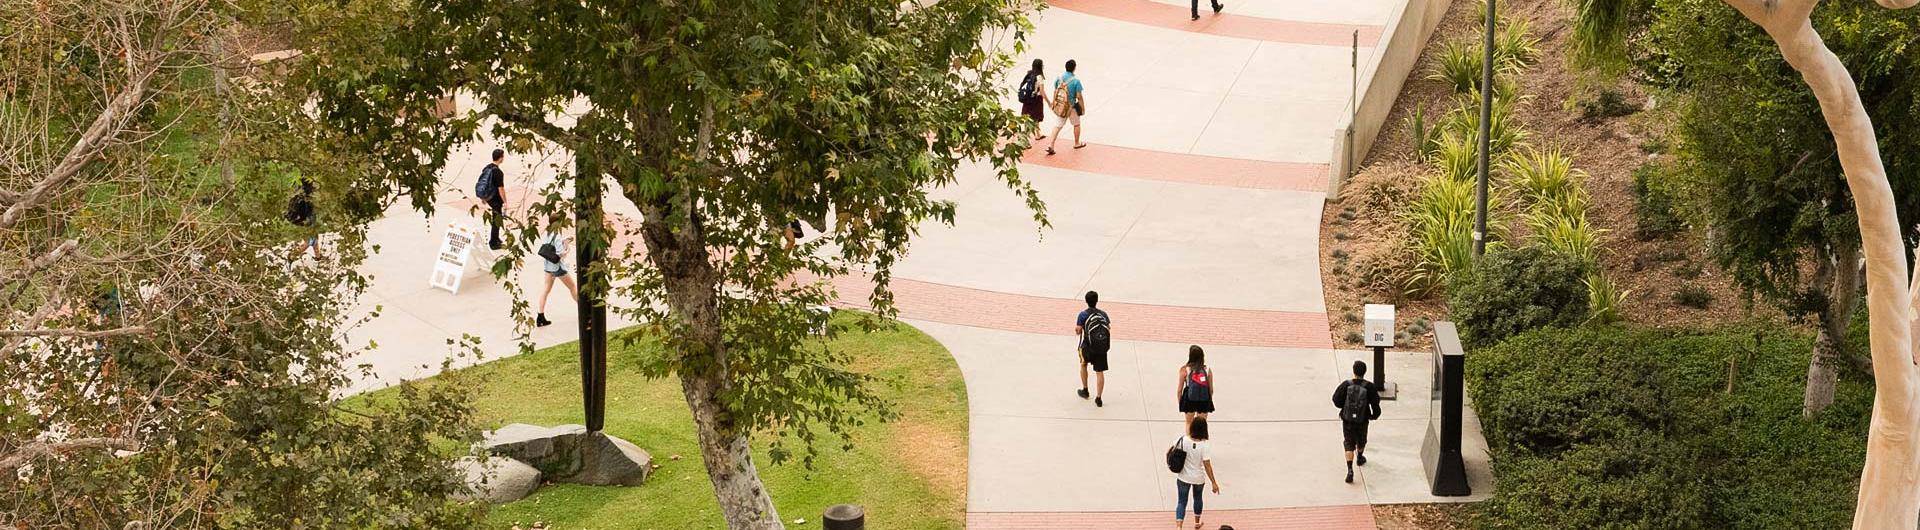 Aerial view of students walking across campus